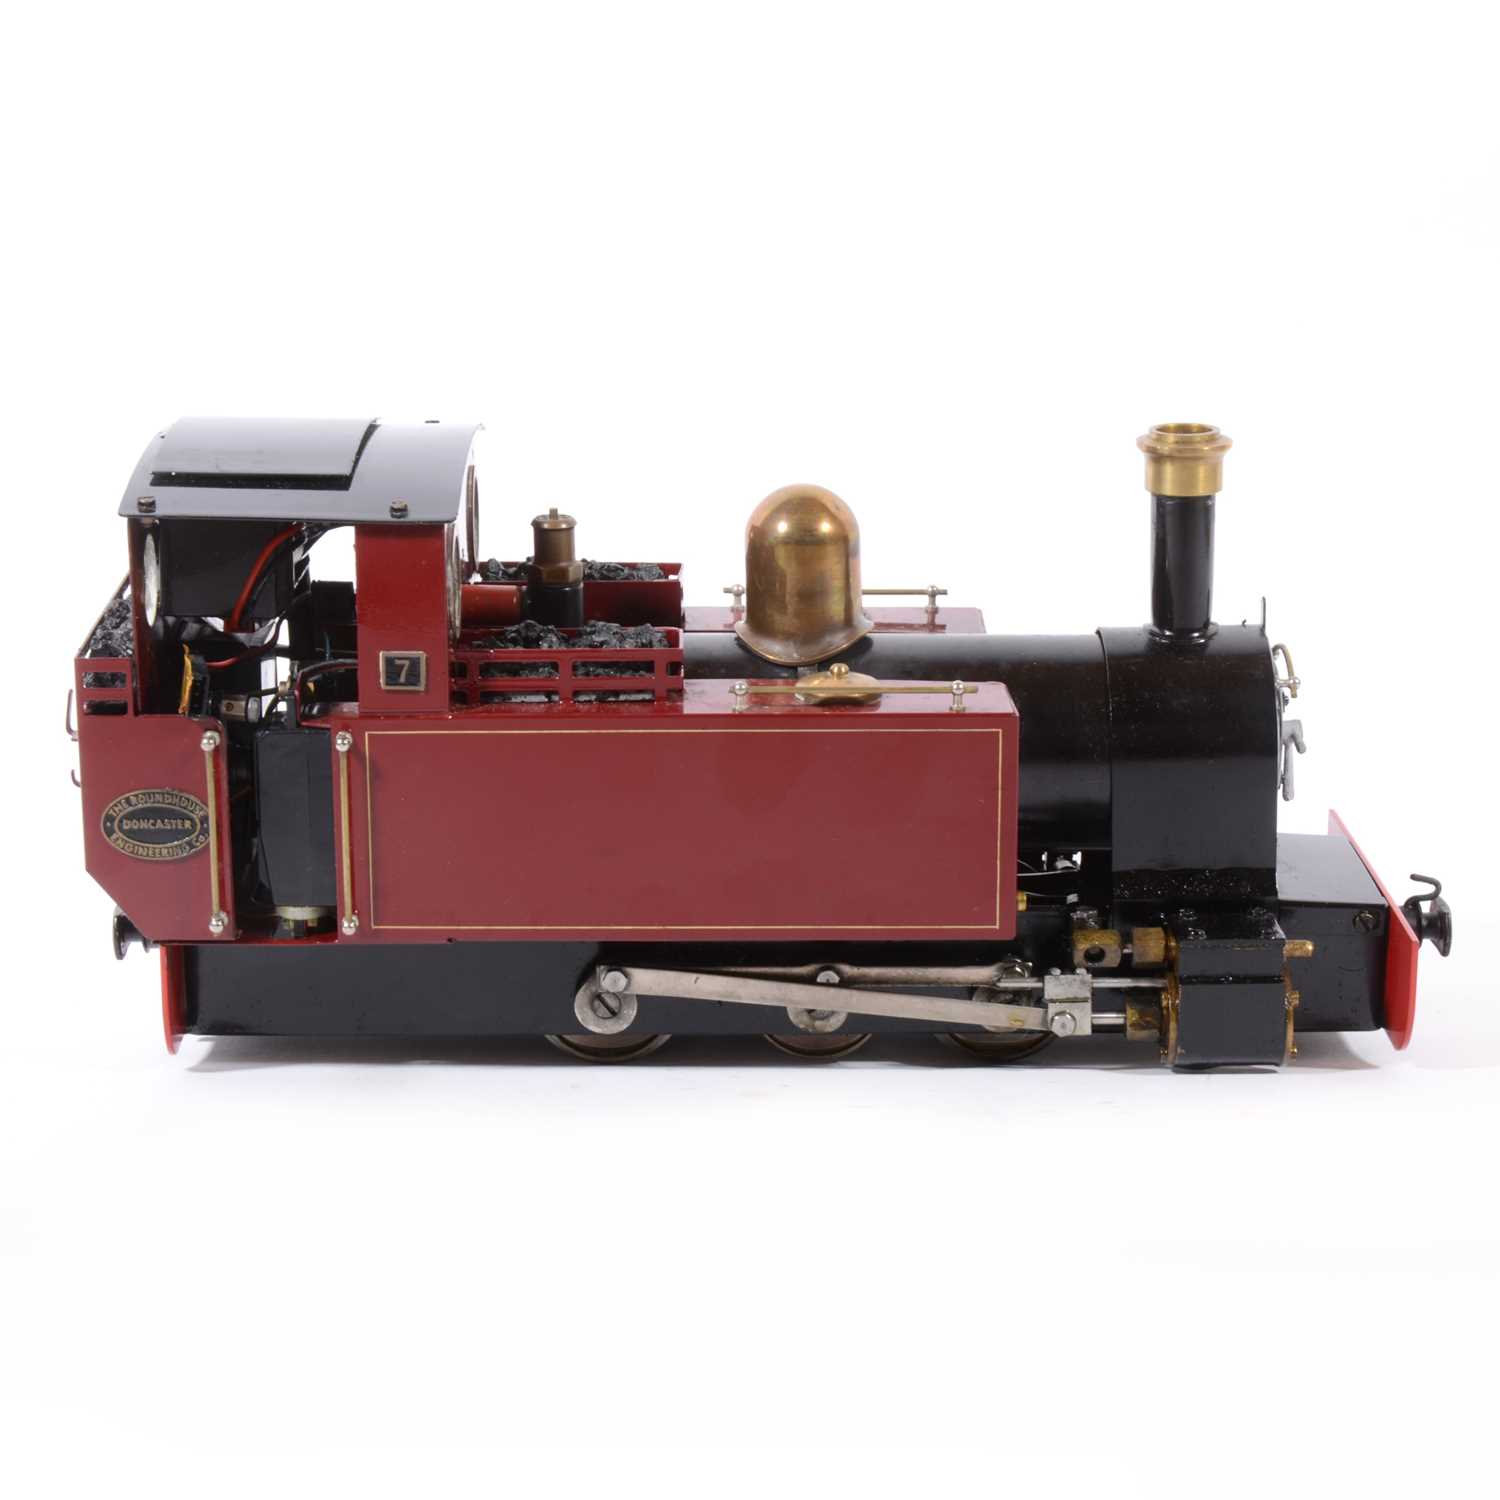 Lot 61 - Roundhouse live steam, gauge 1 / G scale, 45mm locomotive, 0-6-0, no.7 maroon, in case.